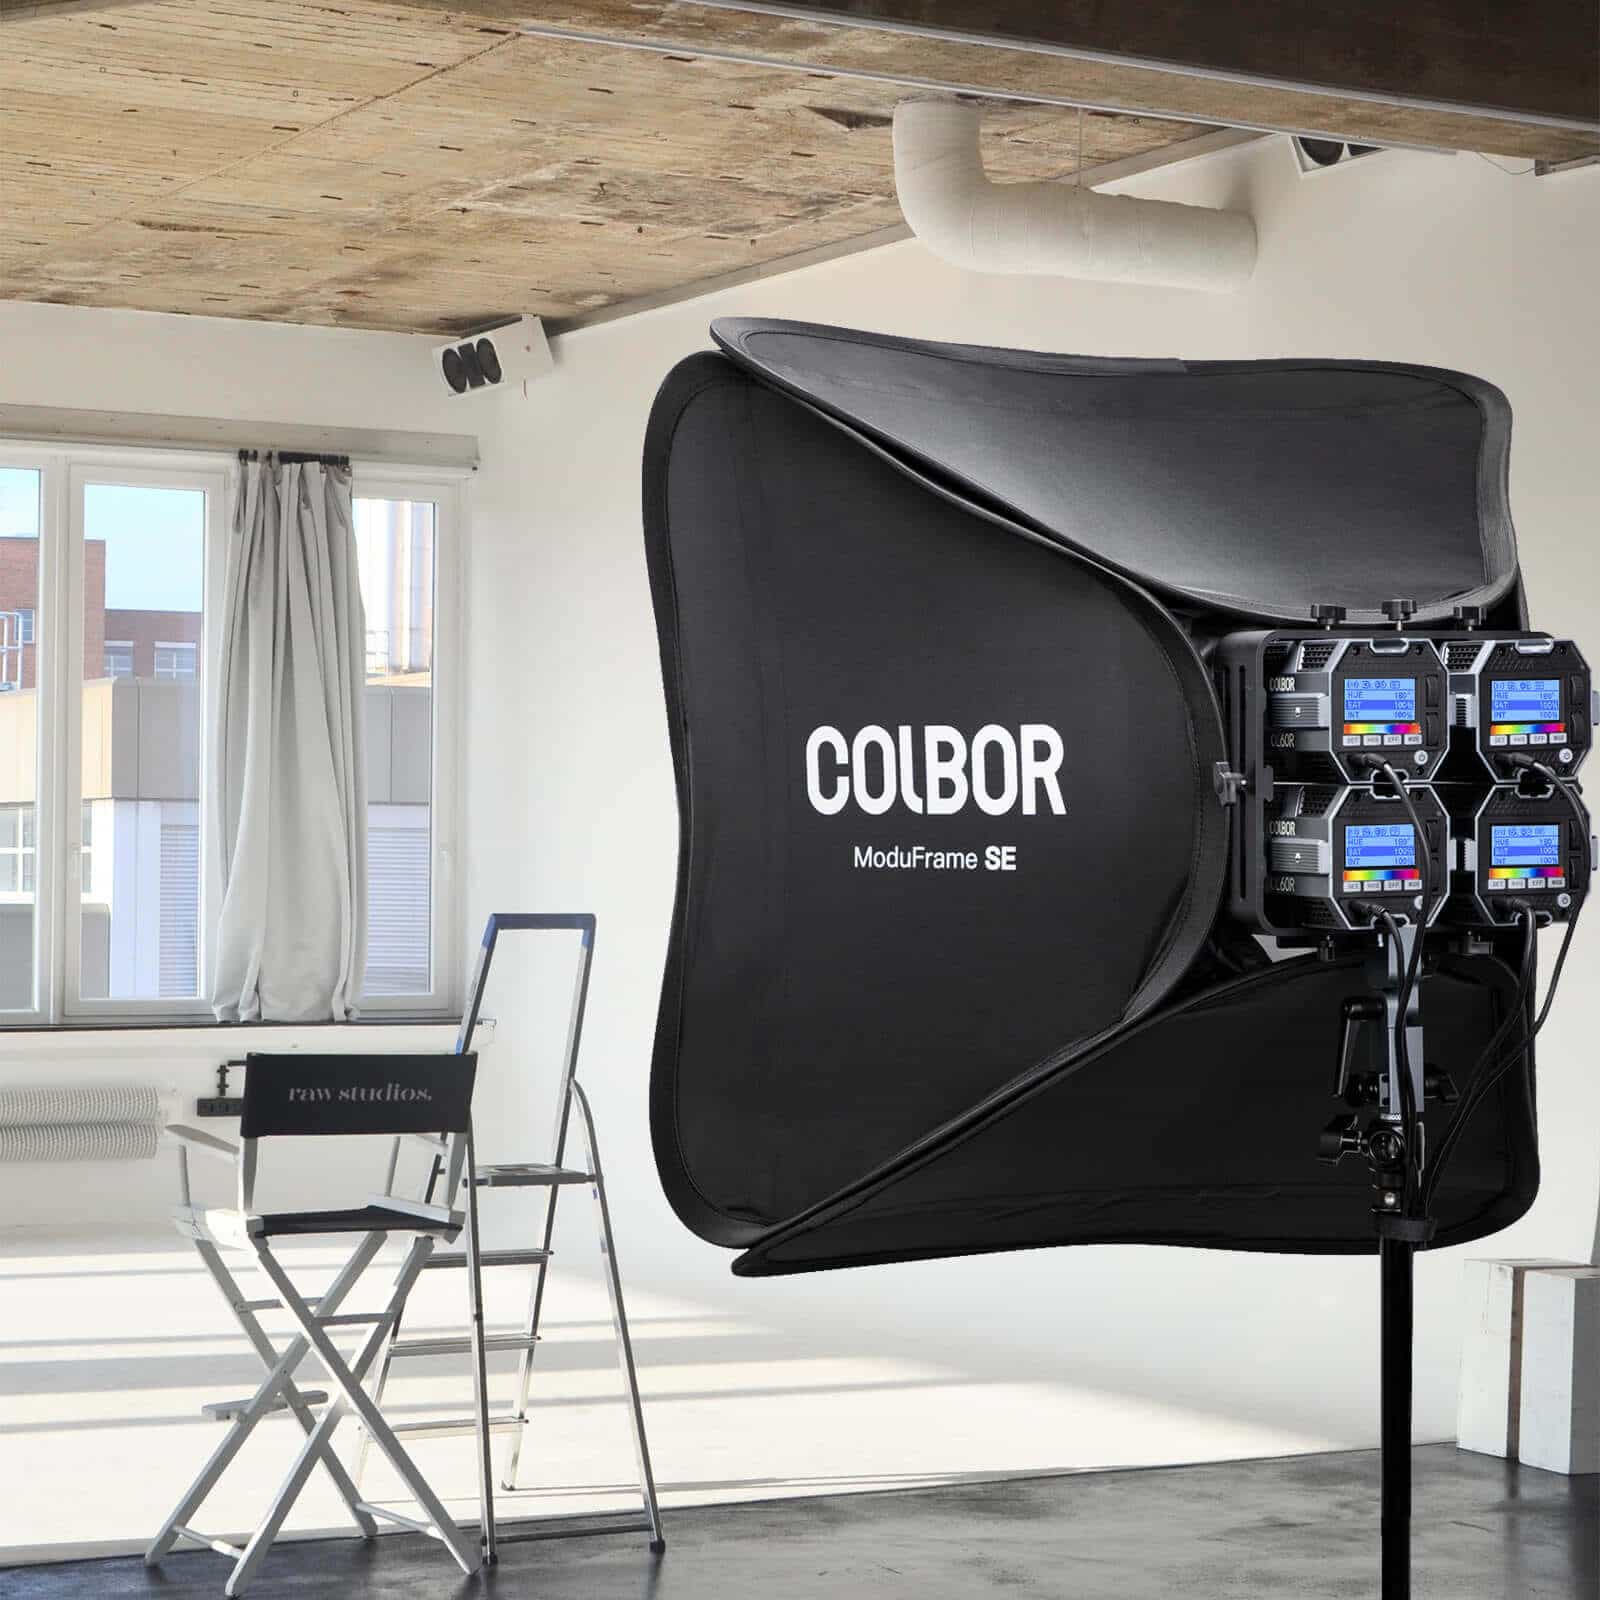 COLBOR ModuFrame SE 60x60 softbox can be used for indoor shooting.